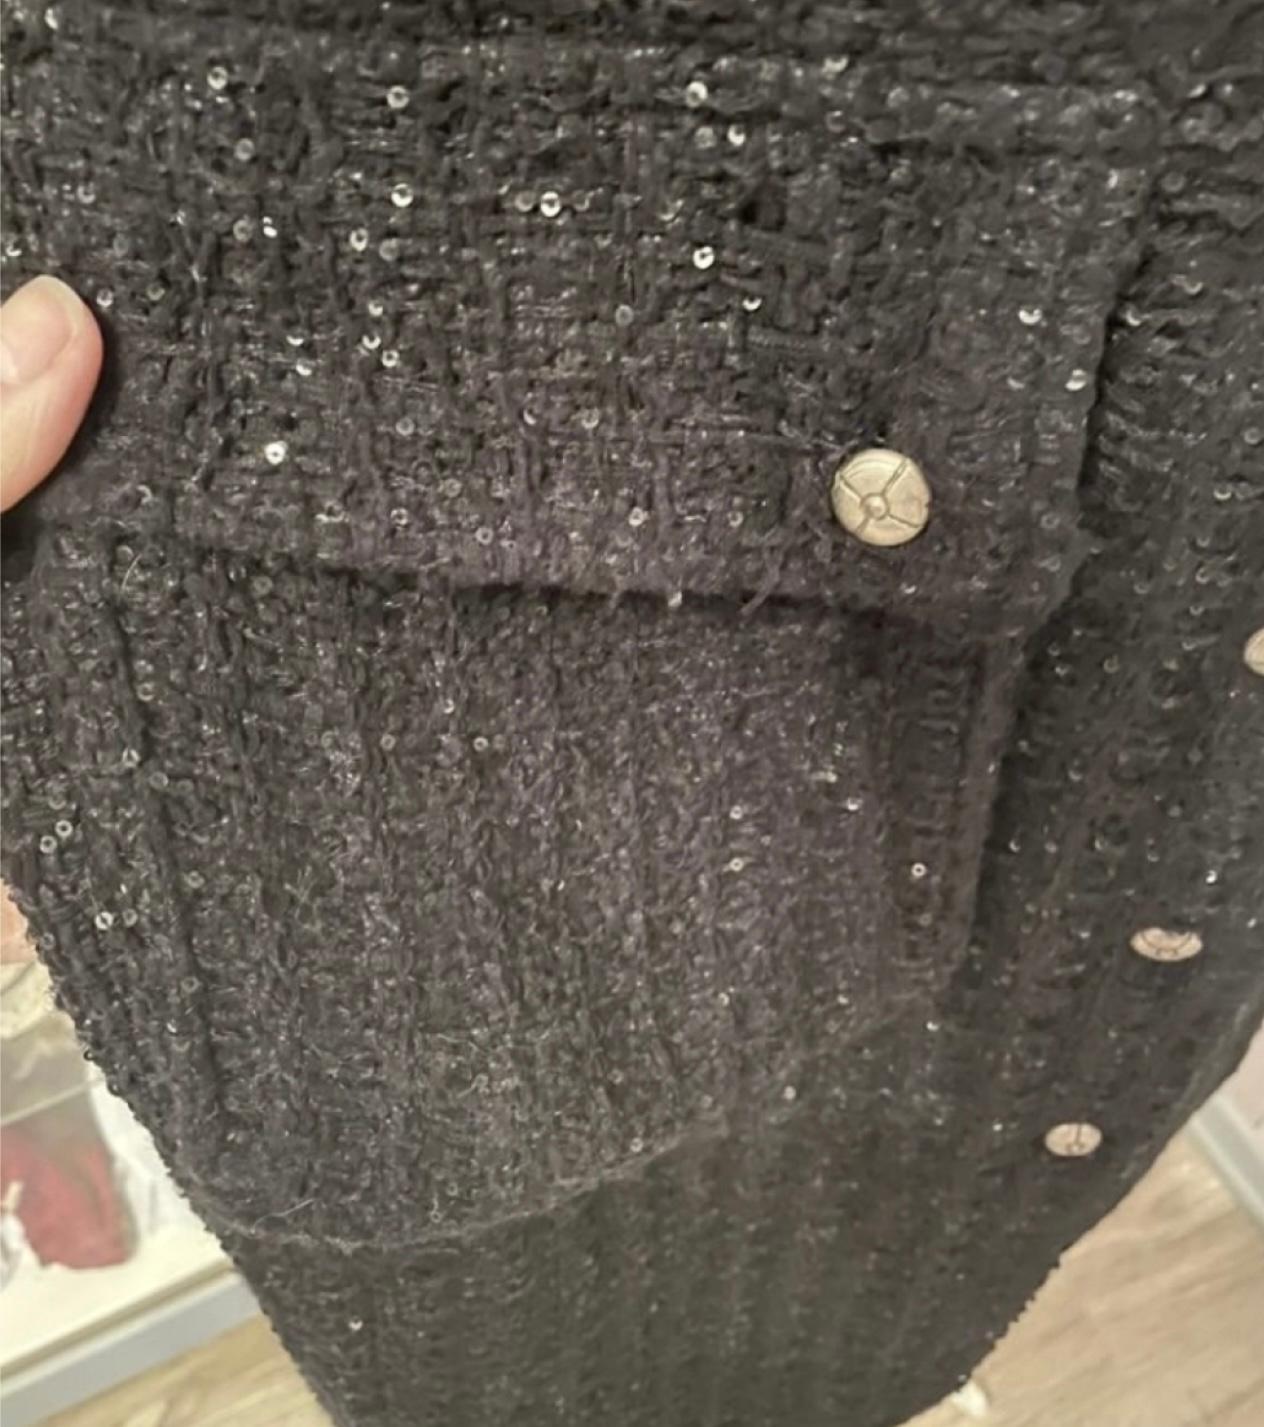 Stunning Chanel black lesage tweed coat with littlest sequin embellishment.
CC logo buttons
Size mark 42 FR. Only tried once, condition is pristine.